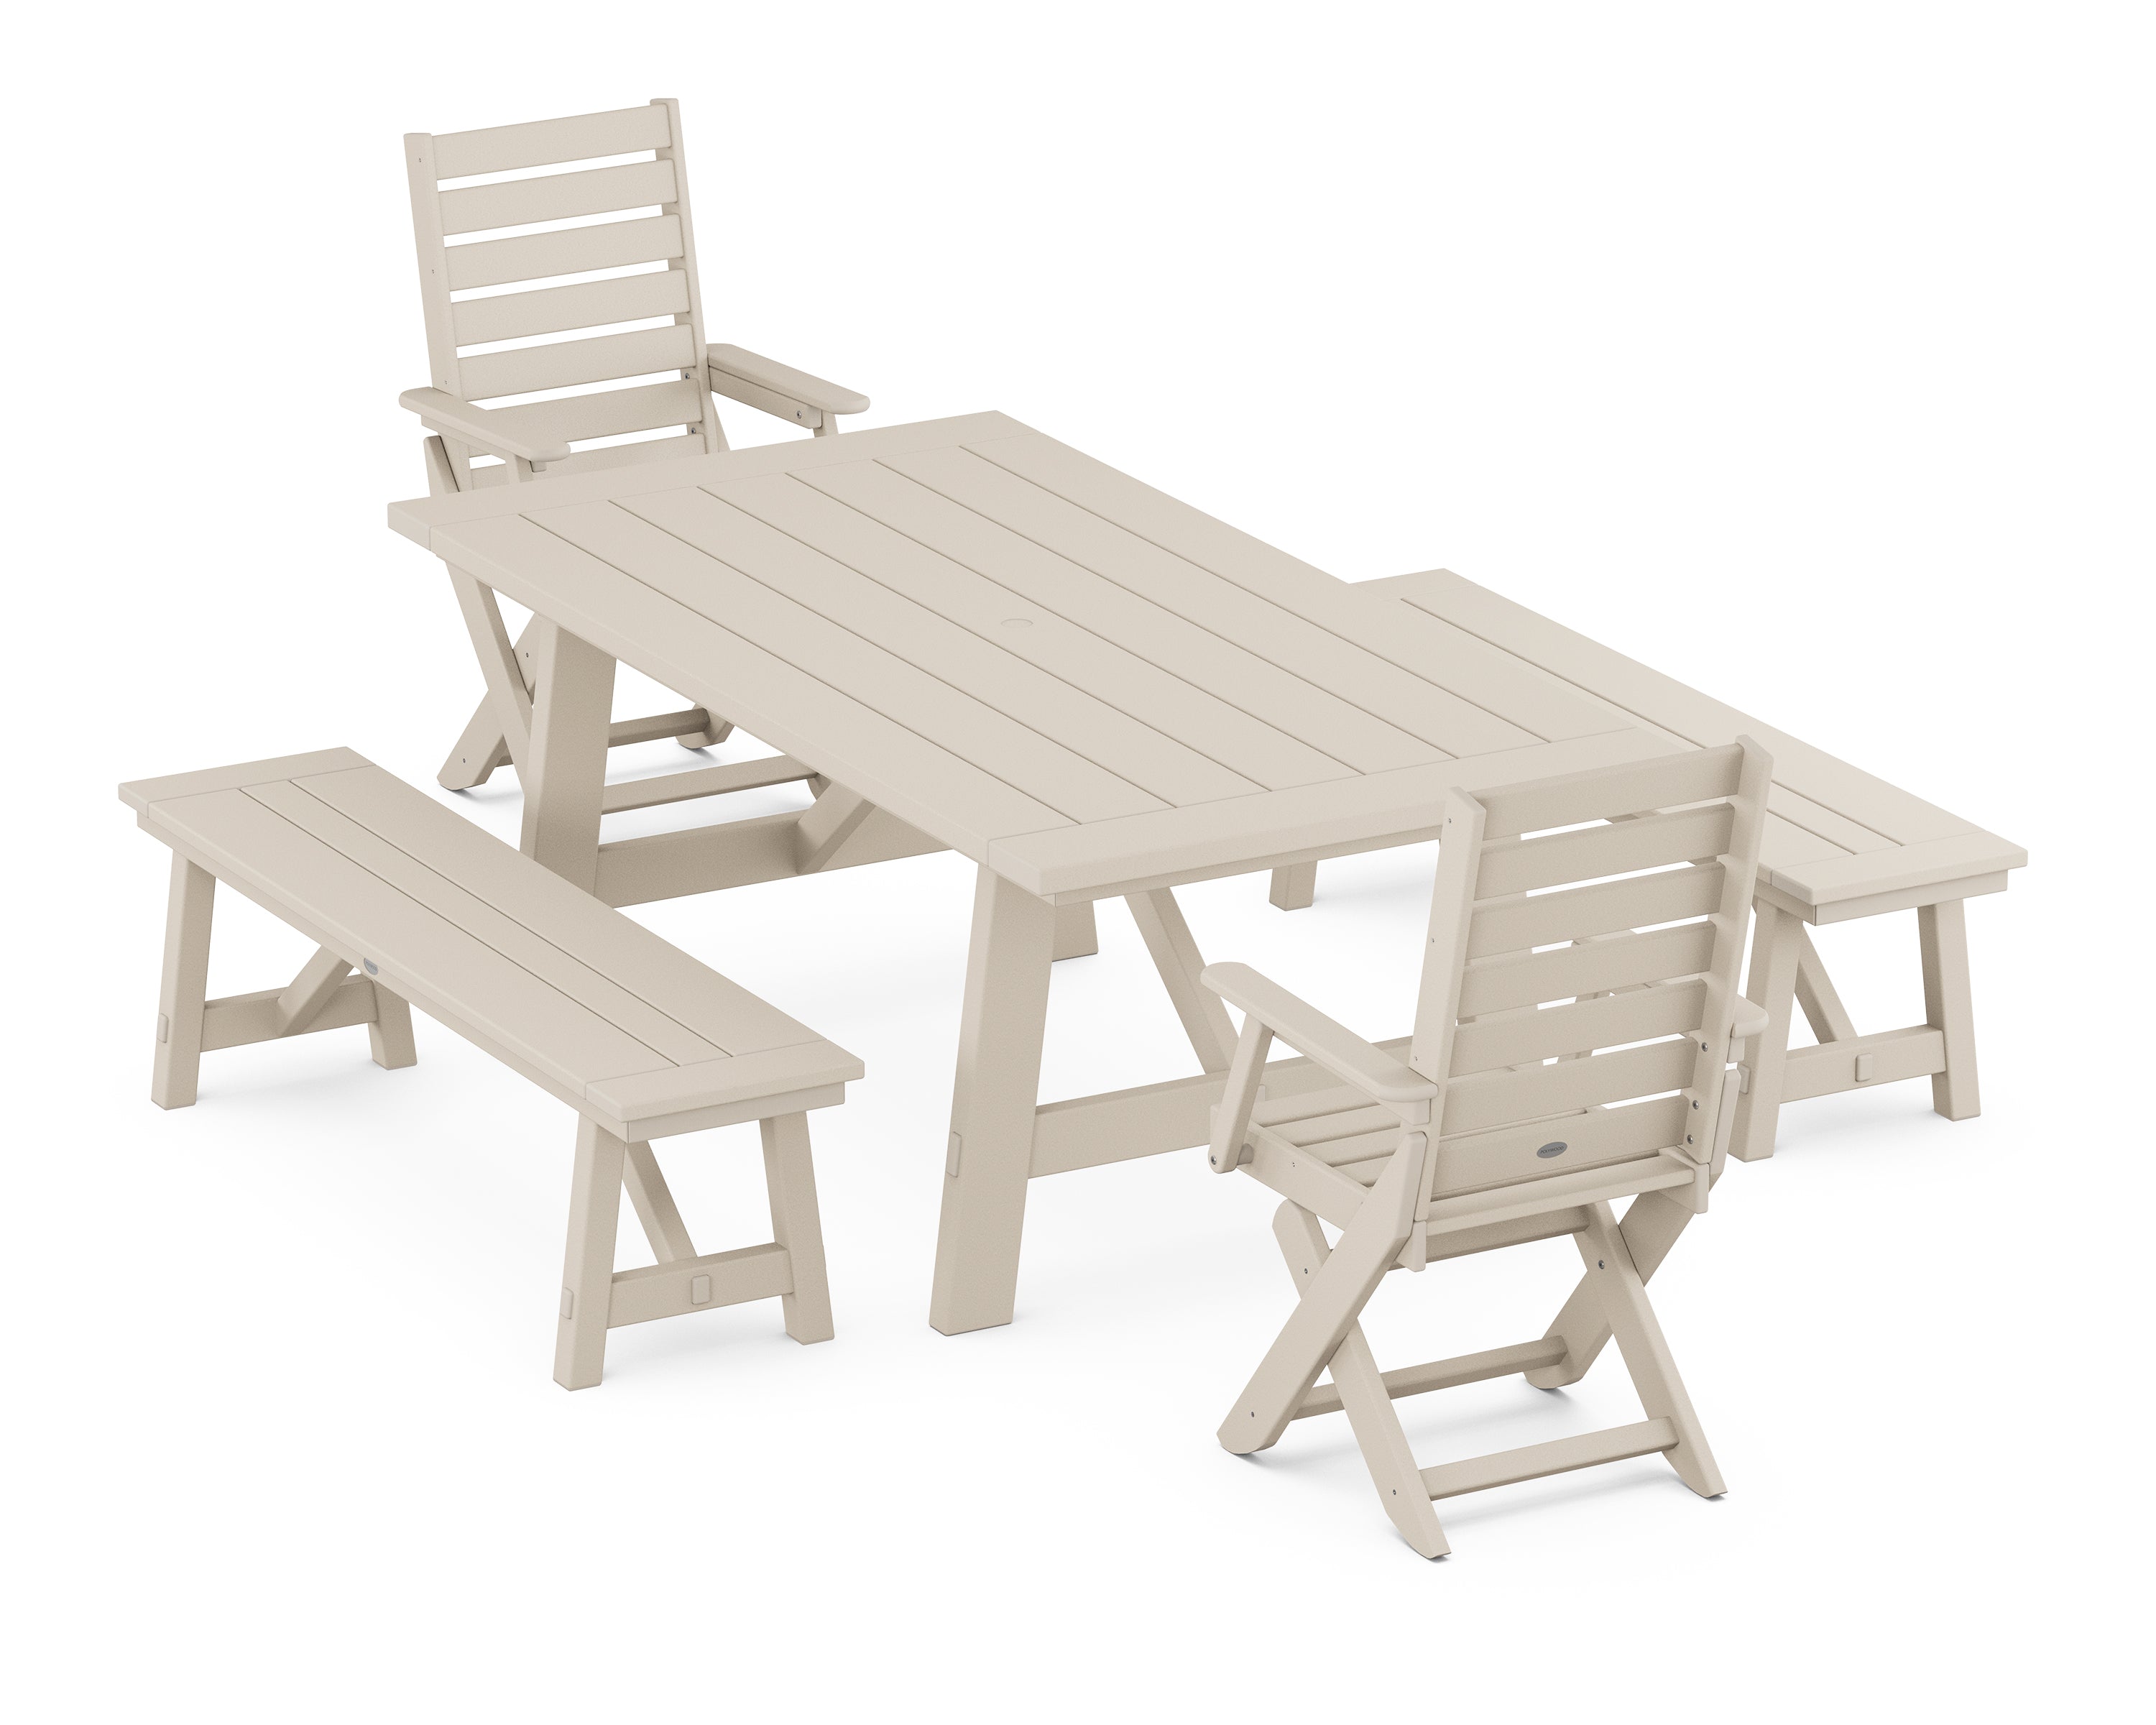 POLYWOOD® Captain Folding Chair 5-Piece Rustic Farmhouse Dining Set With Benches in Sand